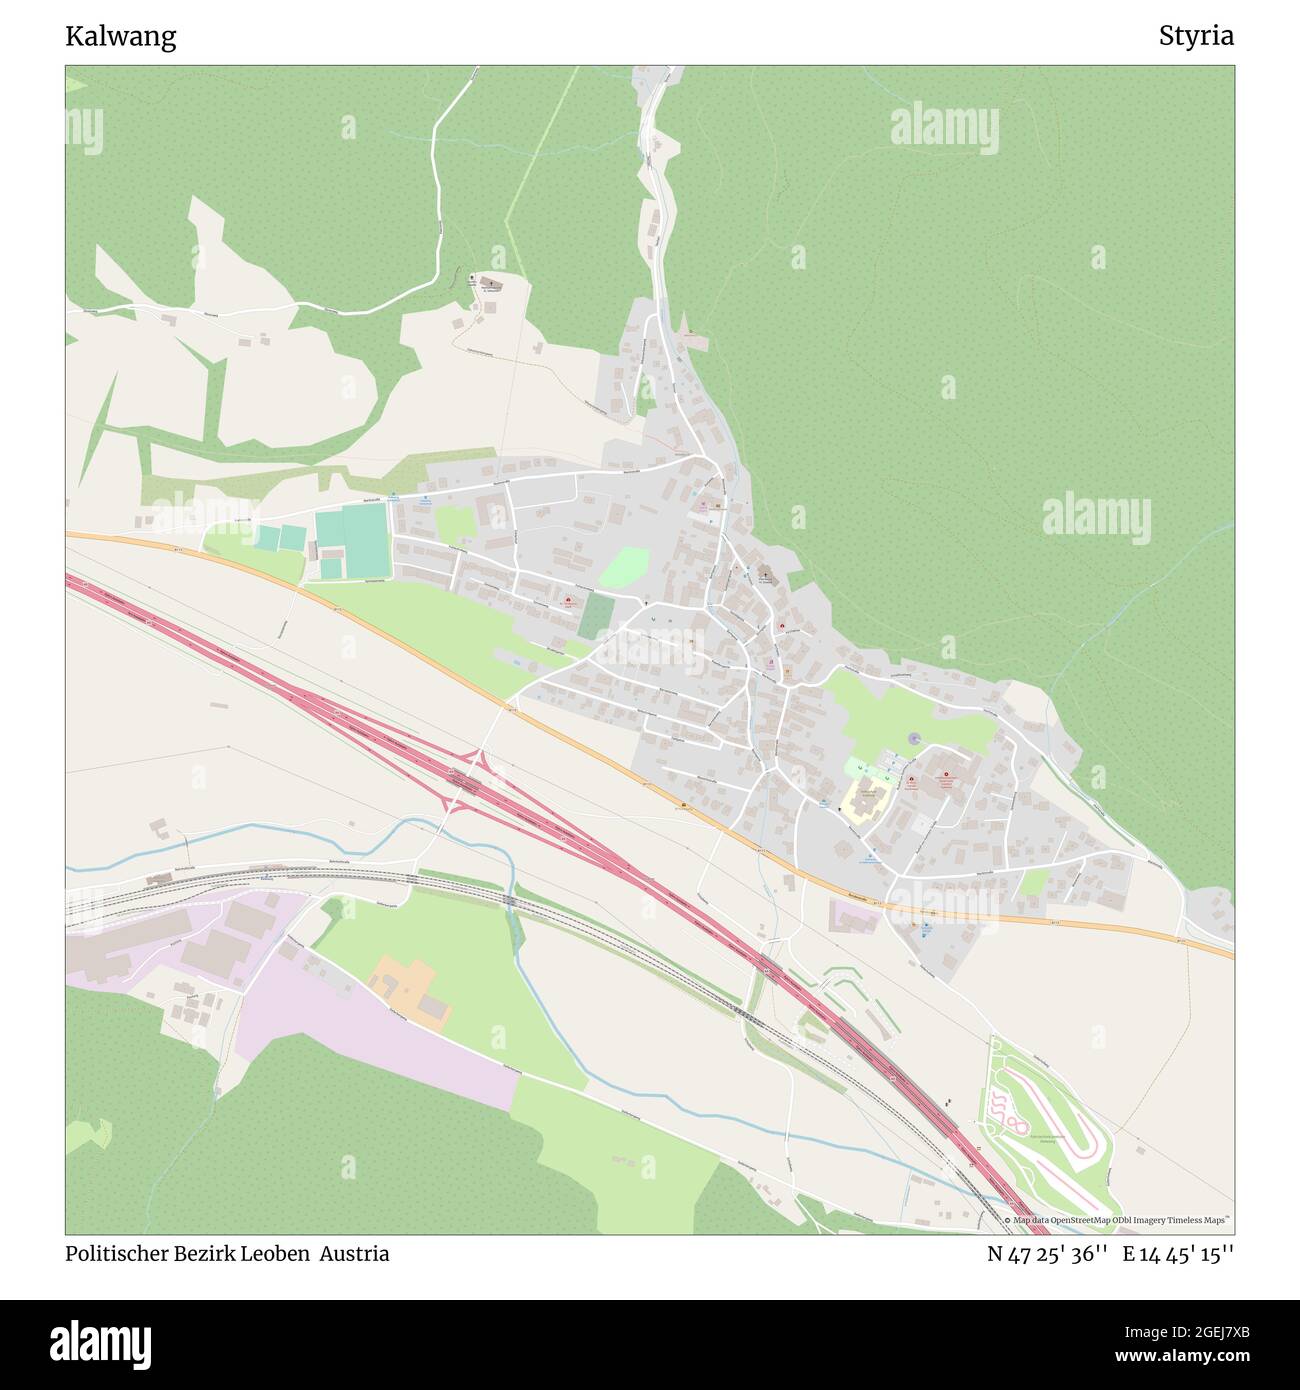 Kalwang, Politischer Bezirk Leoben, Austria, Styria, N 47 25' 36'', E 14 45' 15'', map, Timeless Map published in 2021. Travelers, explorers and adventurers like Florence Nightingale, David Livingstone, Ernest Shackleton, Lewis and Clark and Sherlock Holmes relied on maps to plan travels to the world's most remote corners, Timeless Maps is mapping most locations on the globe, showing the achievement of great dreams Stock Photo